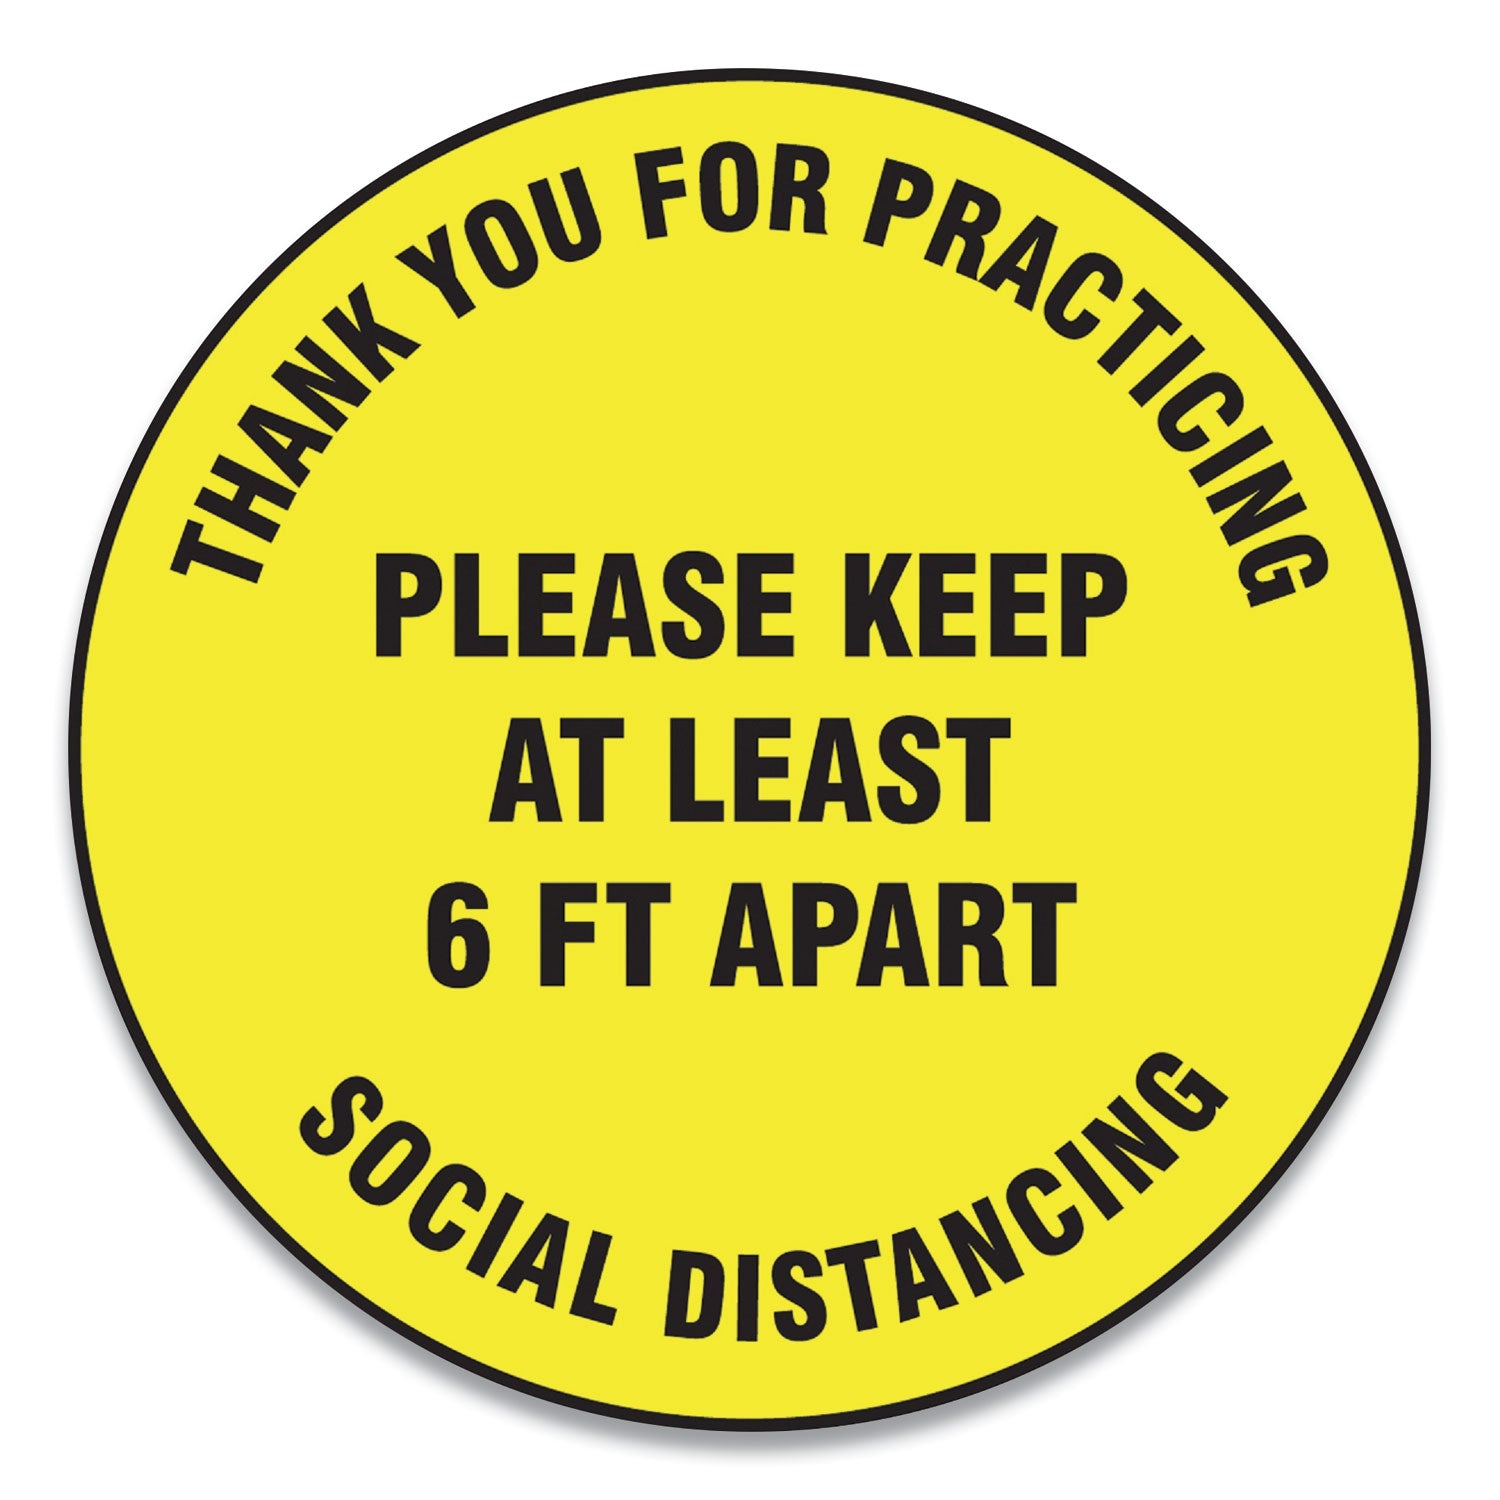 slip-gard-floor-signs-17-circlethank-you-for-practicing-social-distancing-please-keep-at-least-6-ft-apart-yellow-25-pk_gn1mfs427esp - 1